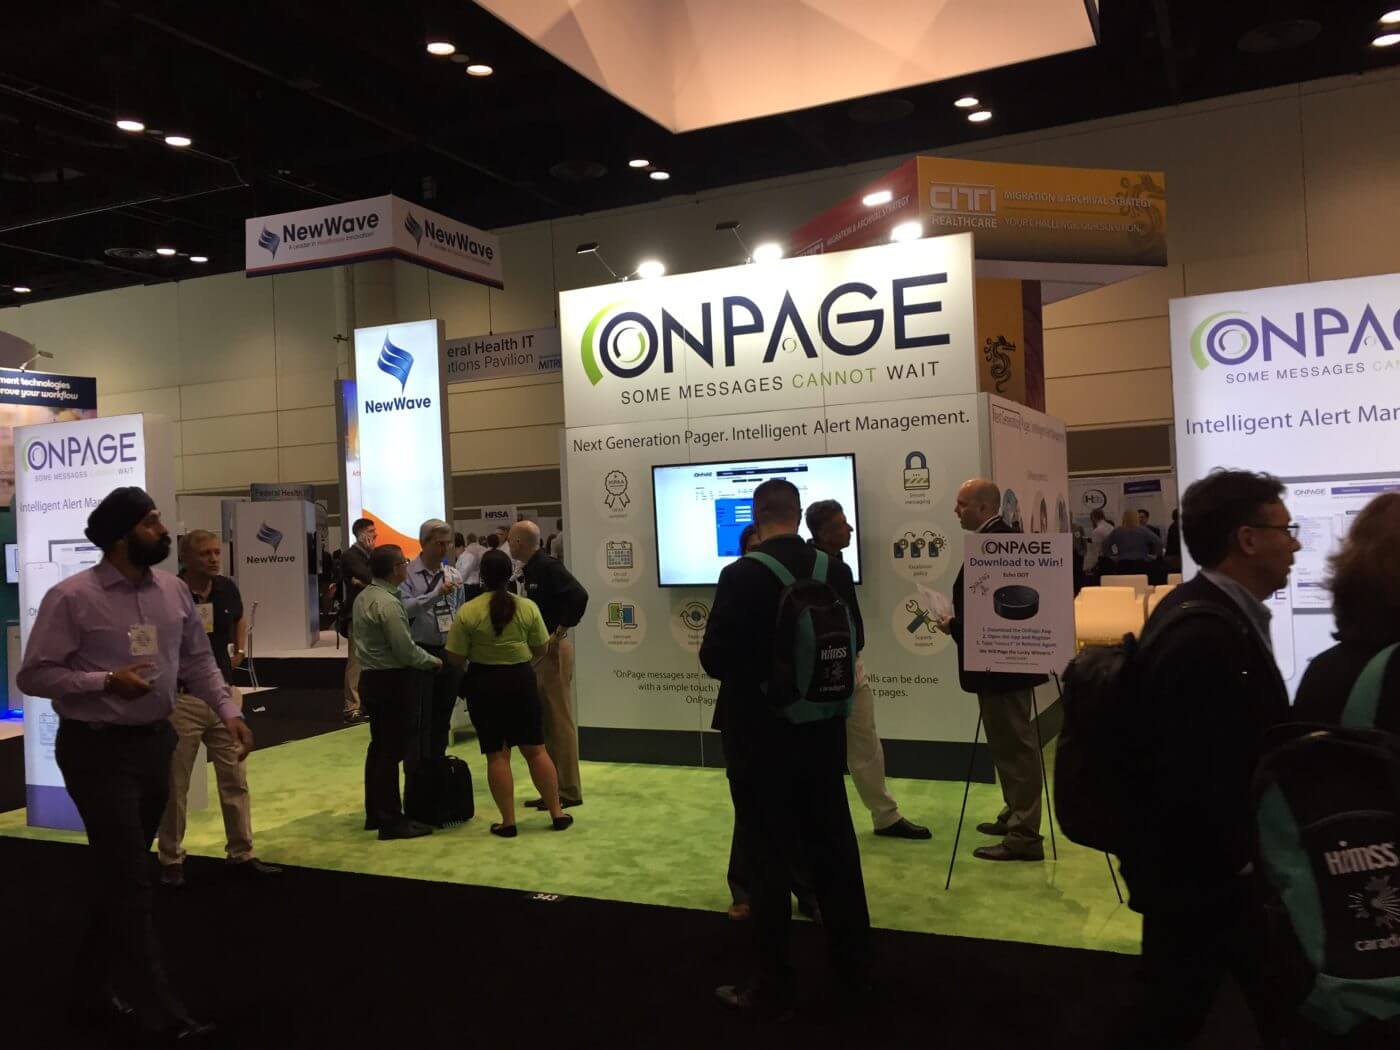 OnPage at HIMSS 17